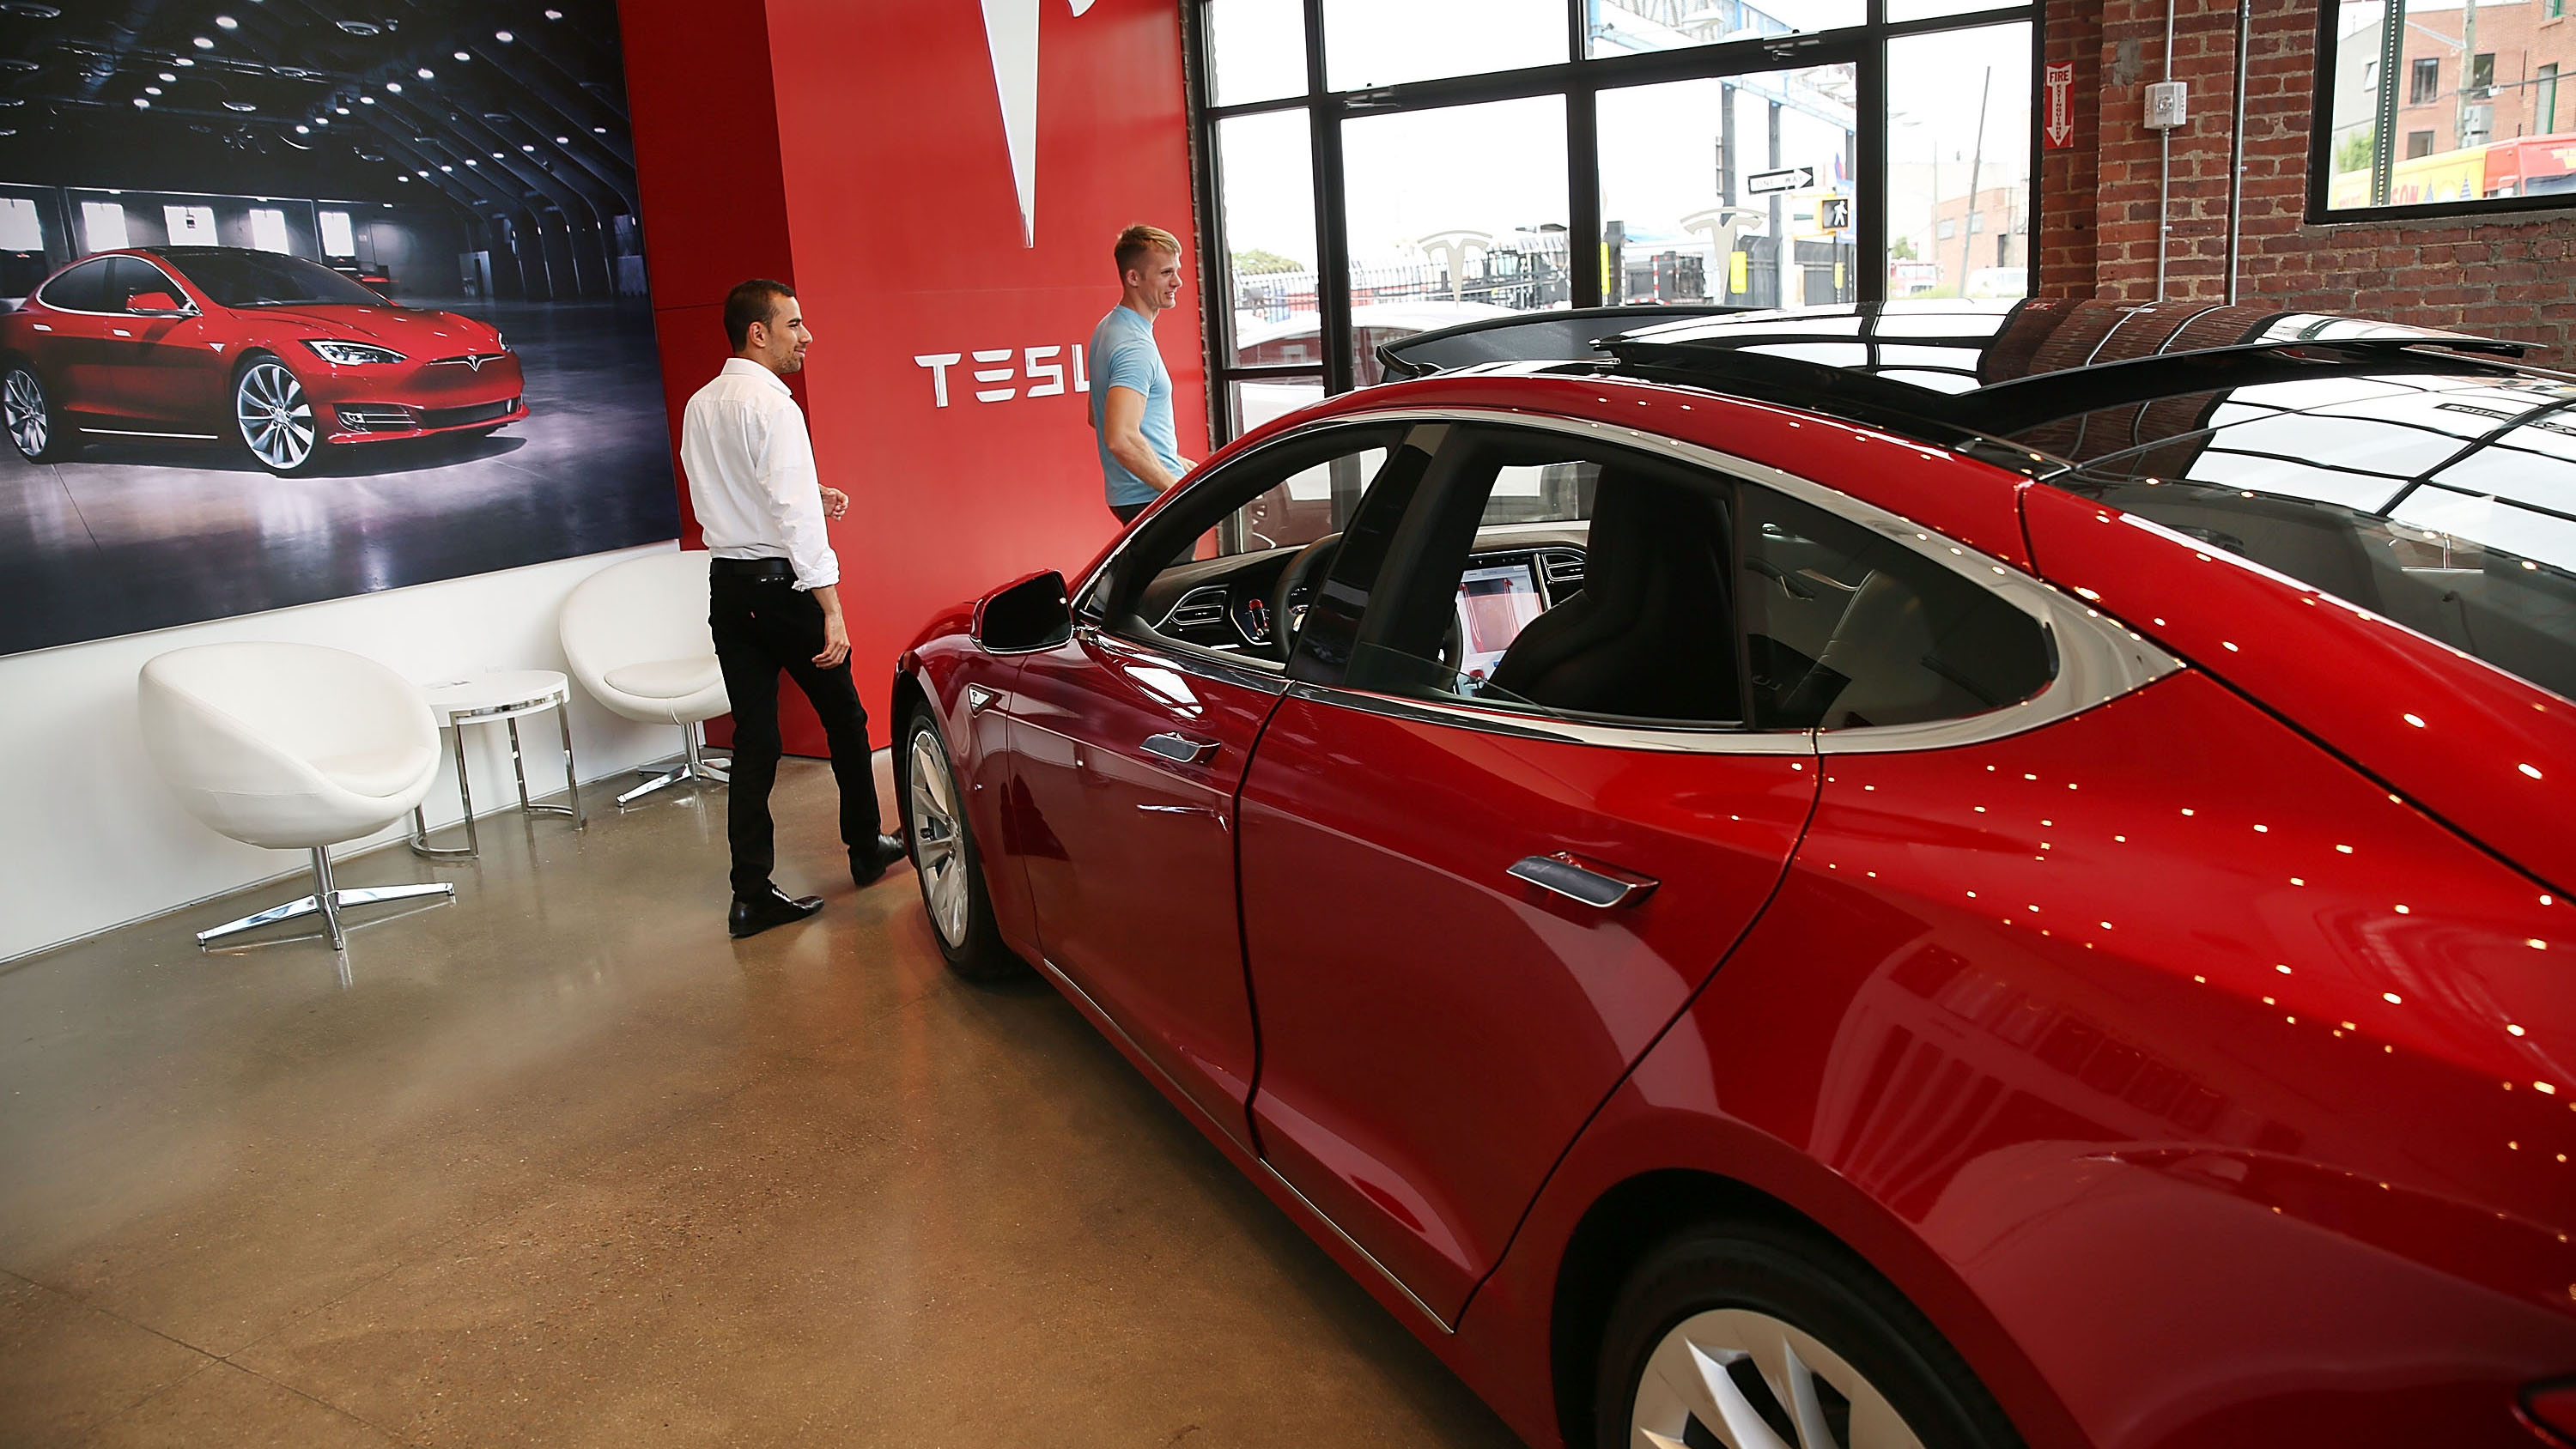 Tesla Just Passed GM to Become Top U.S. Carmaker - Bloomberg3000 x 1688